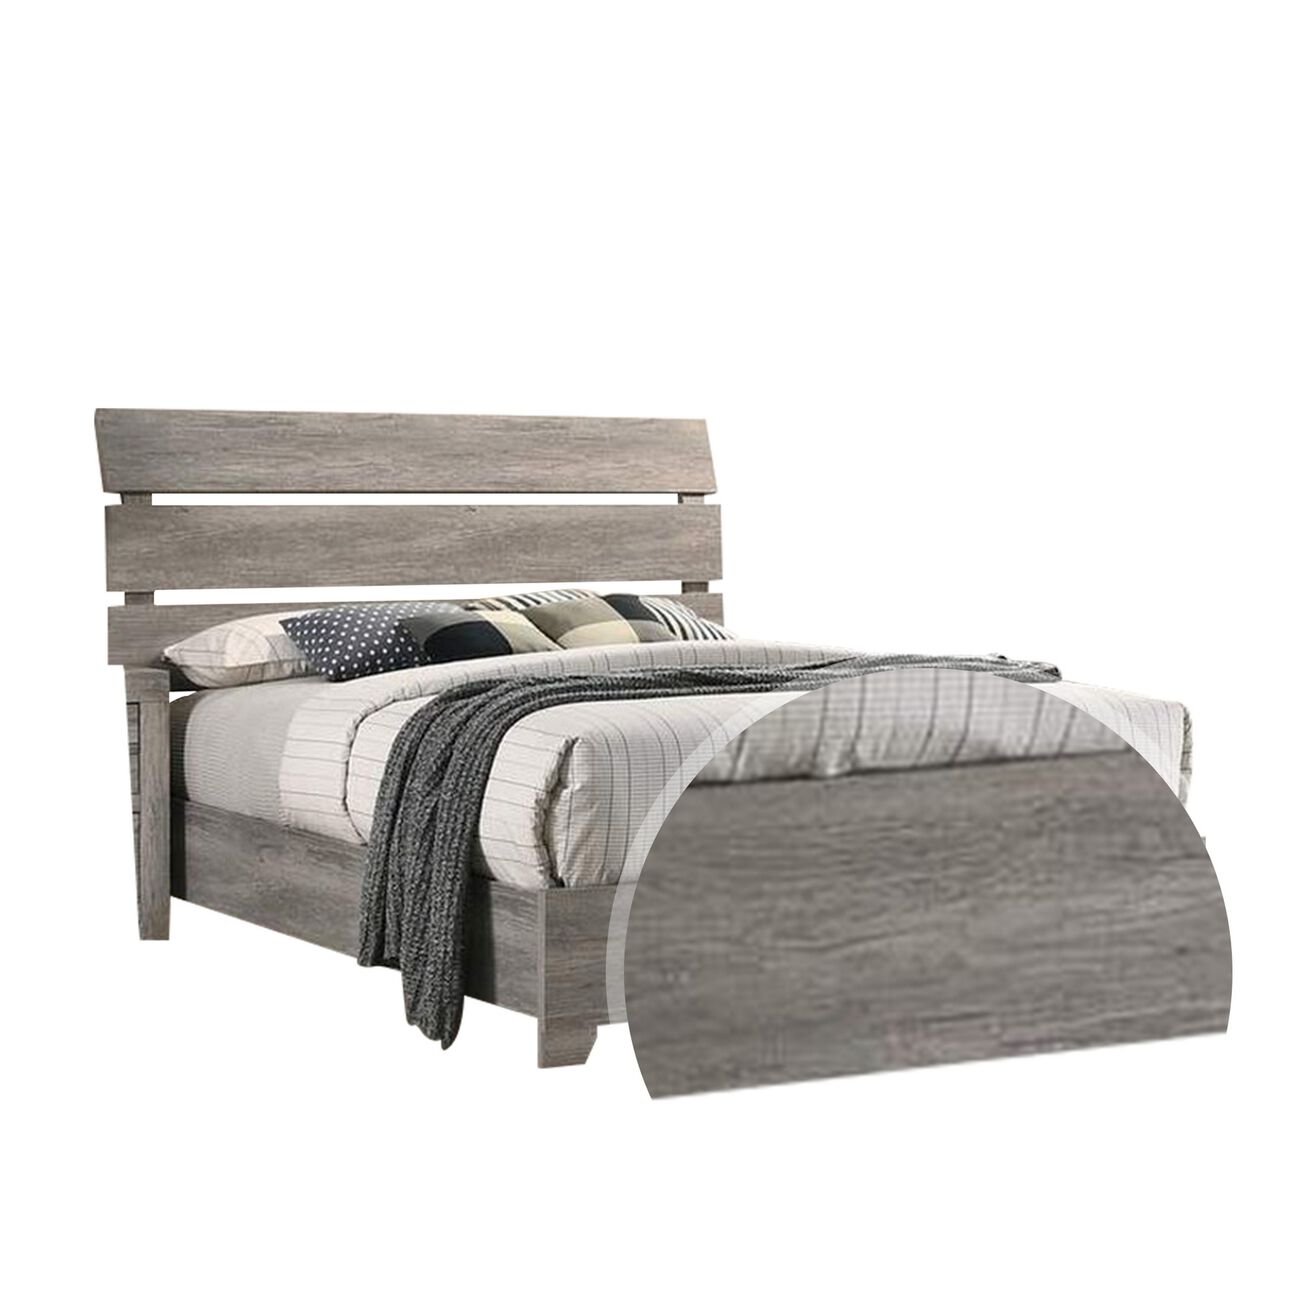 Wooden Queen Slatted Headboard with Low Footboard and Bracket Feet, Gray